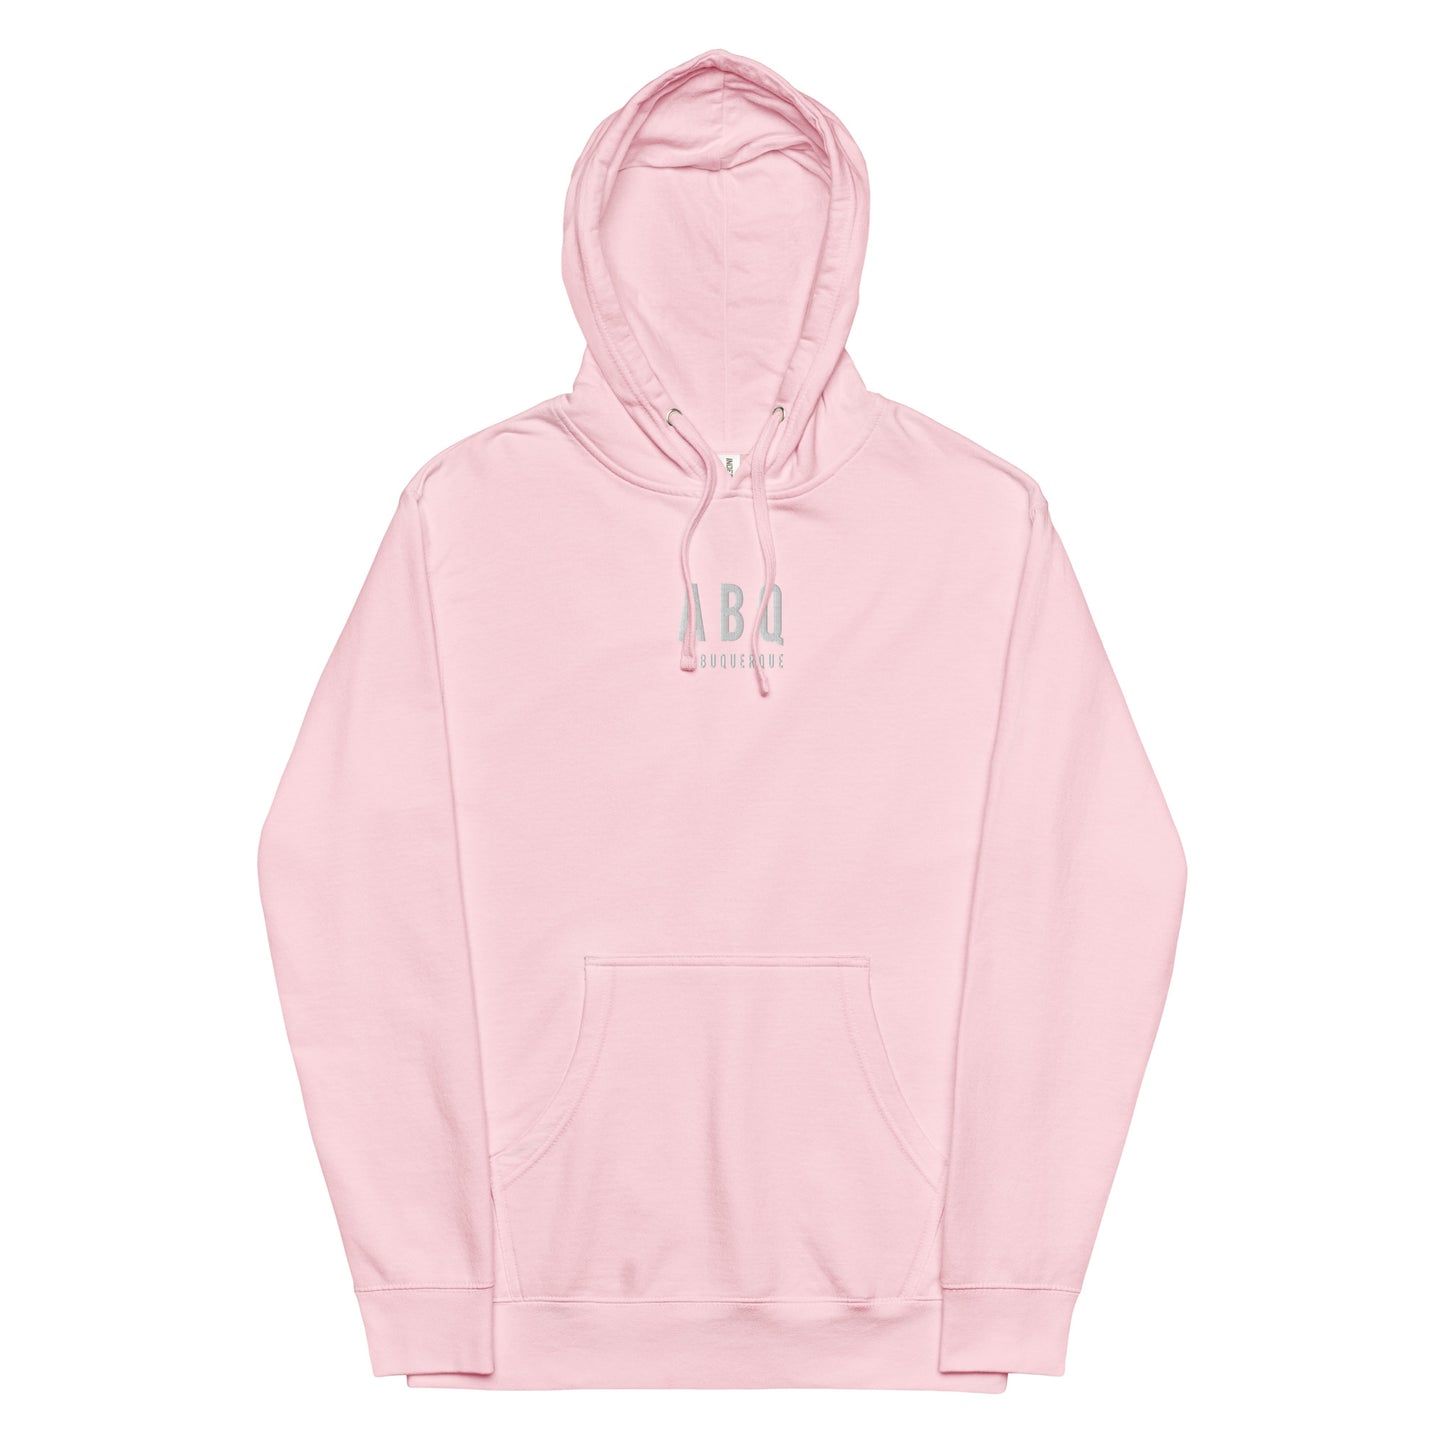 City Midweight Hoodie - White • ABQ Albuquerque • YHM Designs - Image 15